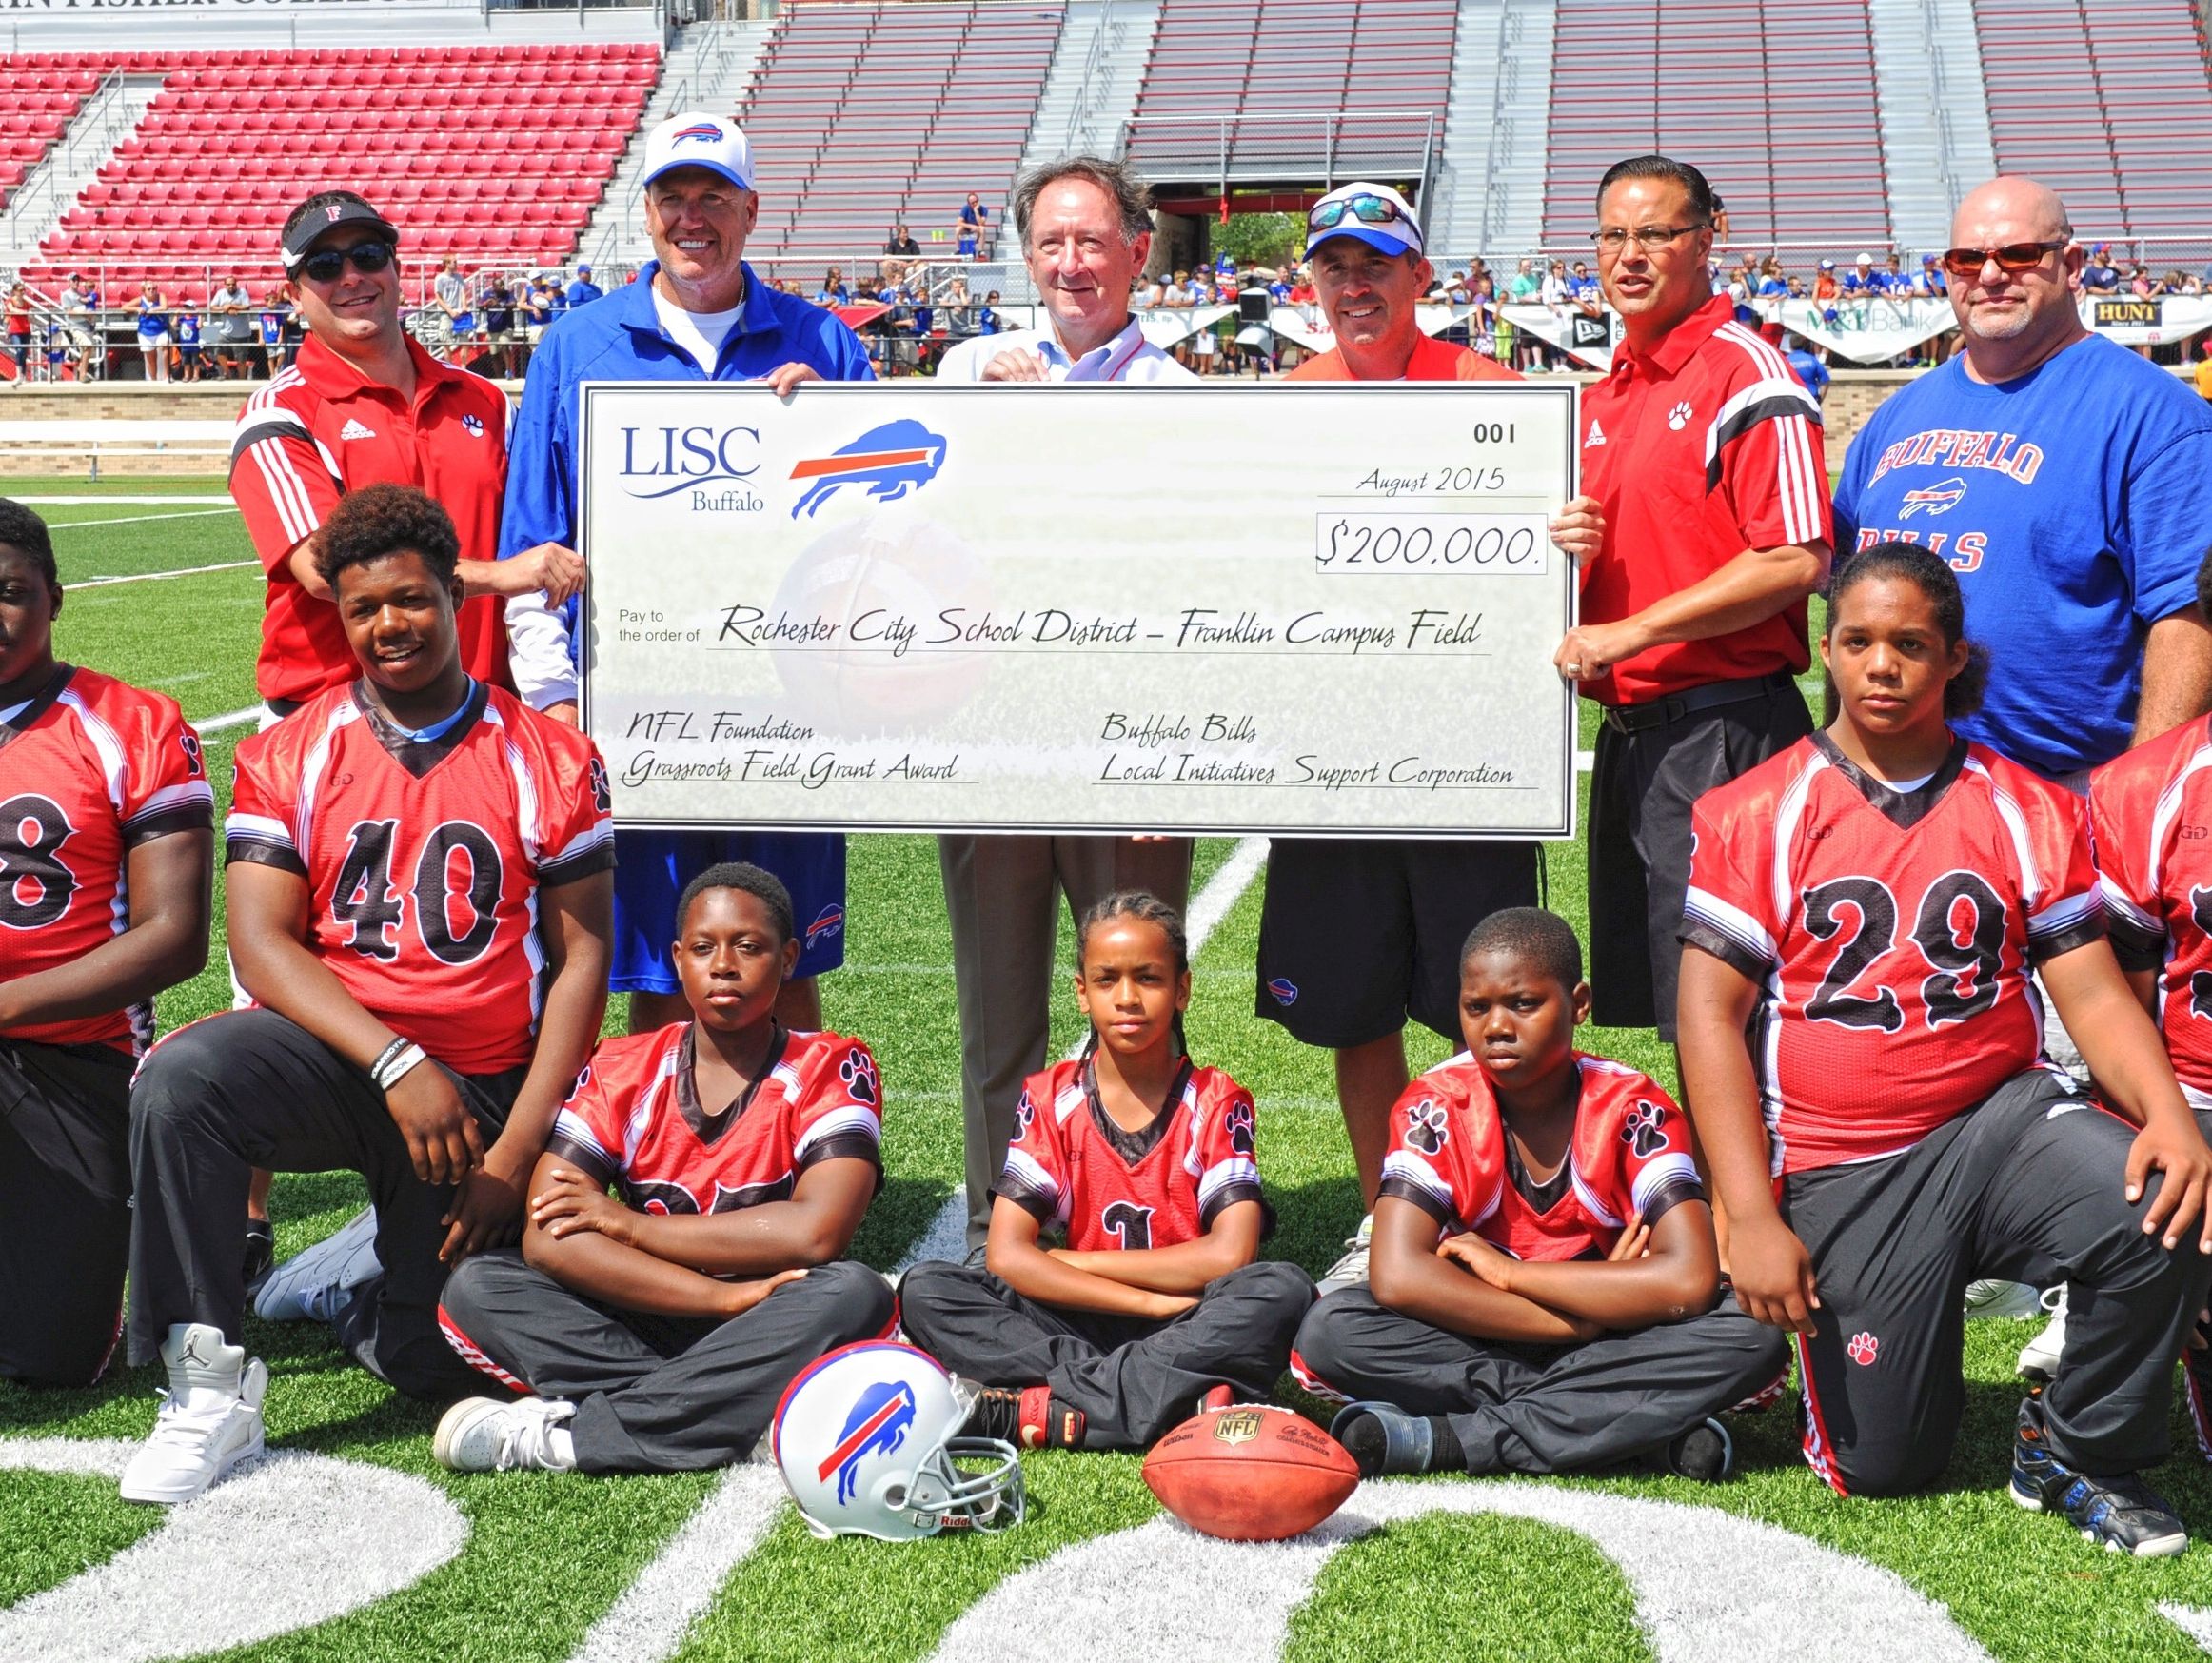 Franklin modified football team members with (back row, from left) Jason George, Franklin coach; Rex Ryan, Bills coach; Michael Clarke, executive director of Local Initiatives Support Corporation-Buffalo; Russ Brandon, Bills president; David Boundy, Franklin Campus athletic director; and Kevin Klein, Integrated Arts and Technology High School principal. A check for $200,000 was presented last year to help construct a new synthetic turf field.